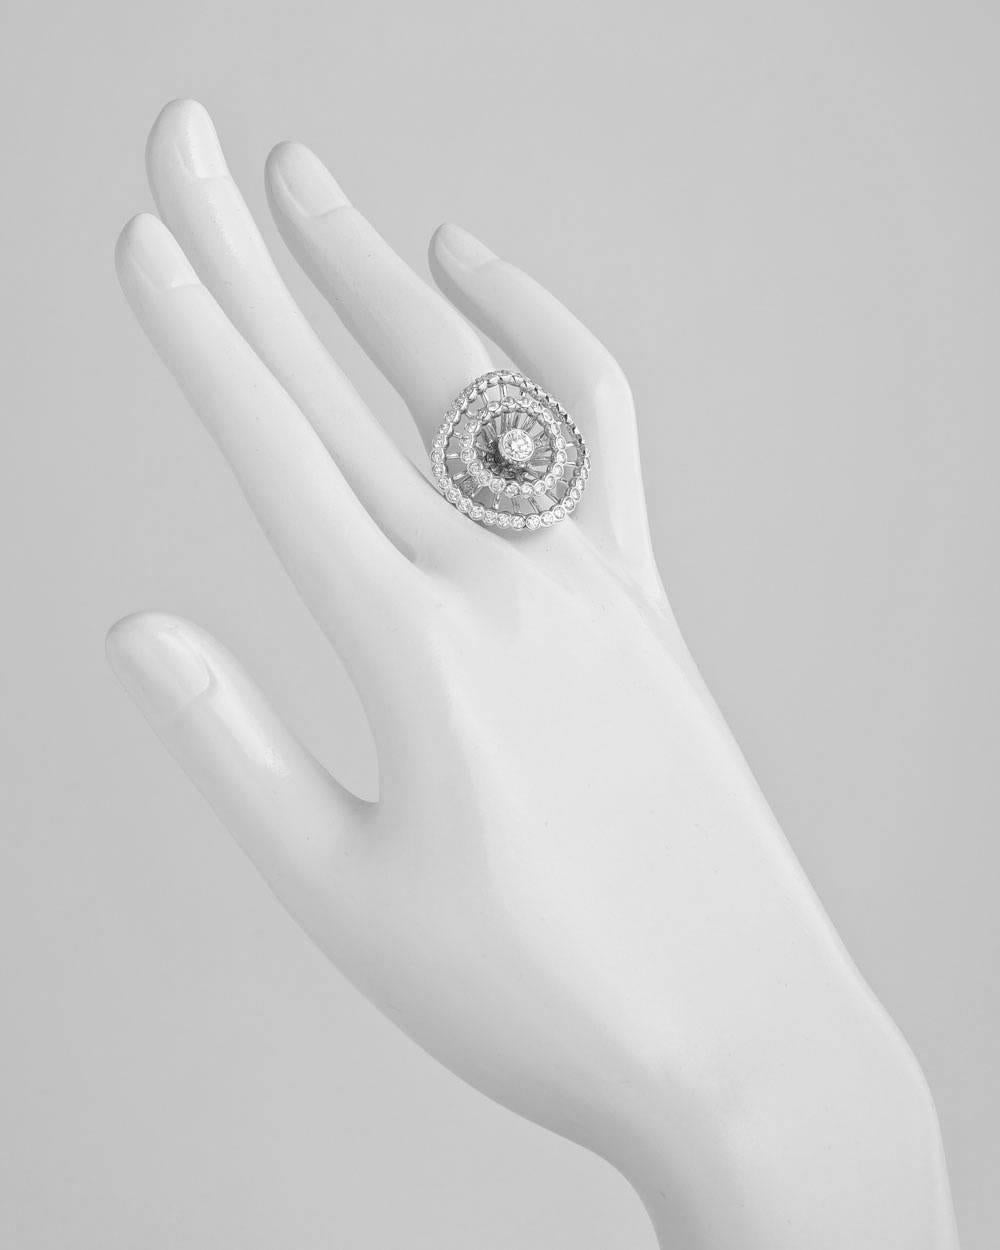 Ma Jolie openwork diamond cocktail ring, featuring one inner circle and one wider outer circle of round diamonds, all surrounding a larger bezel-set round diamond, the diamonds weighing approximately 1.60 total carats (the central larger diamond